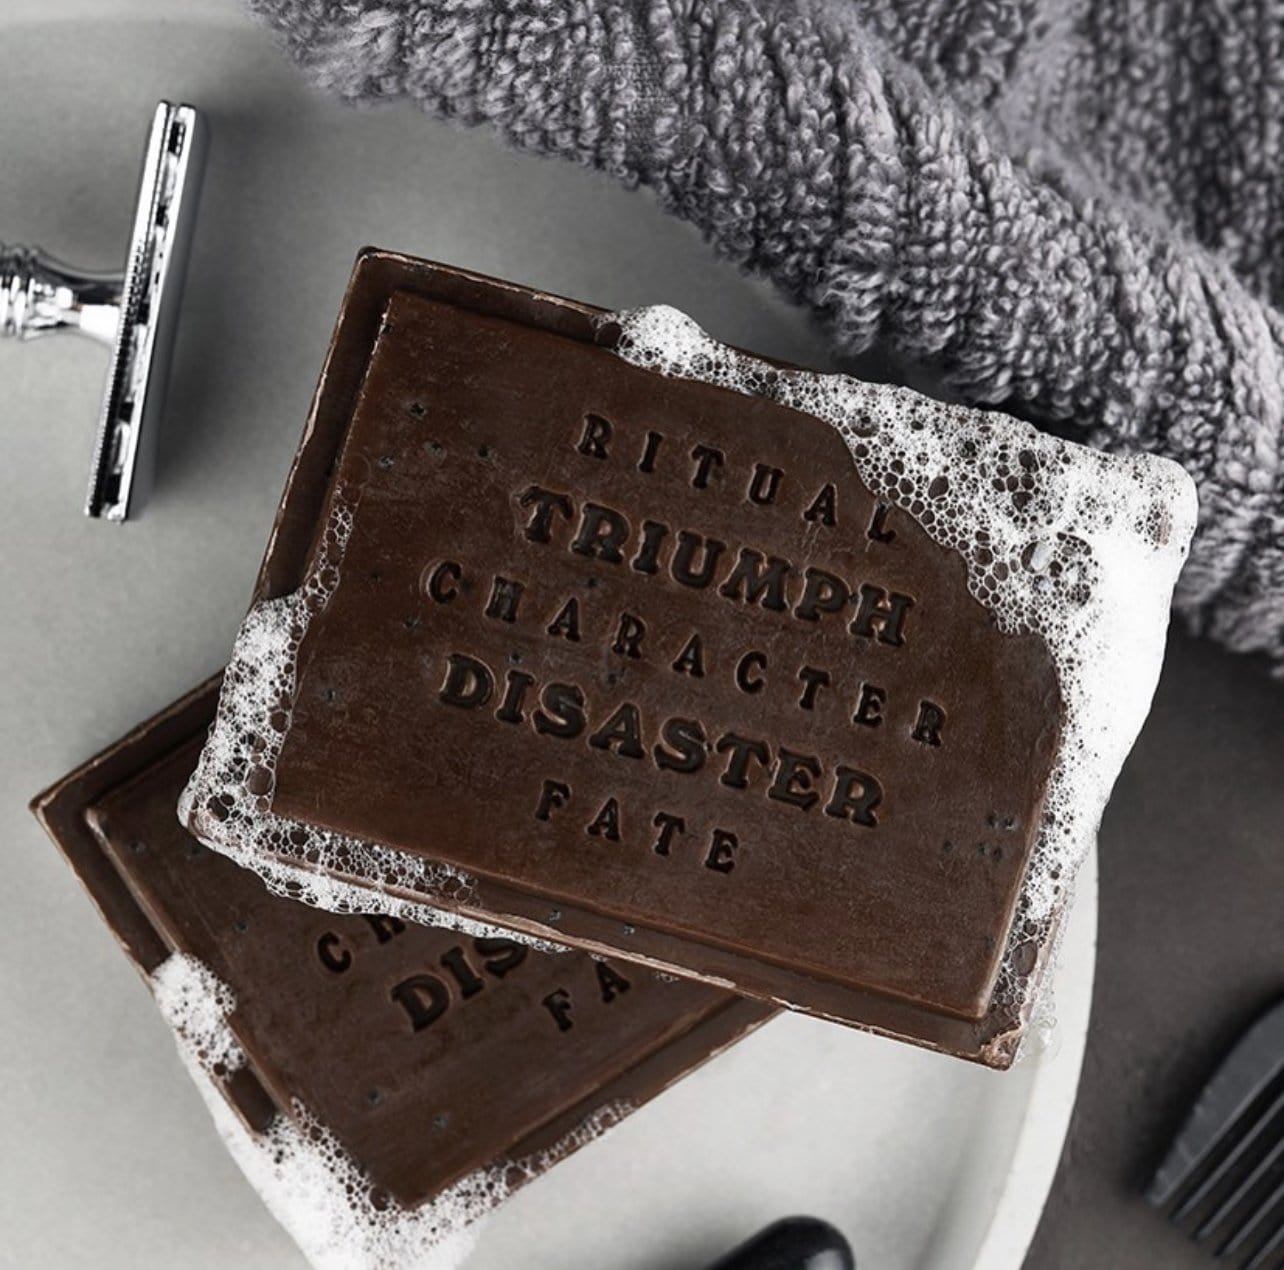 shearer's soap. by Triumph & Disaster